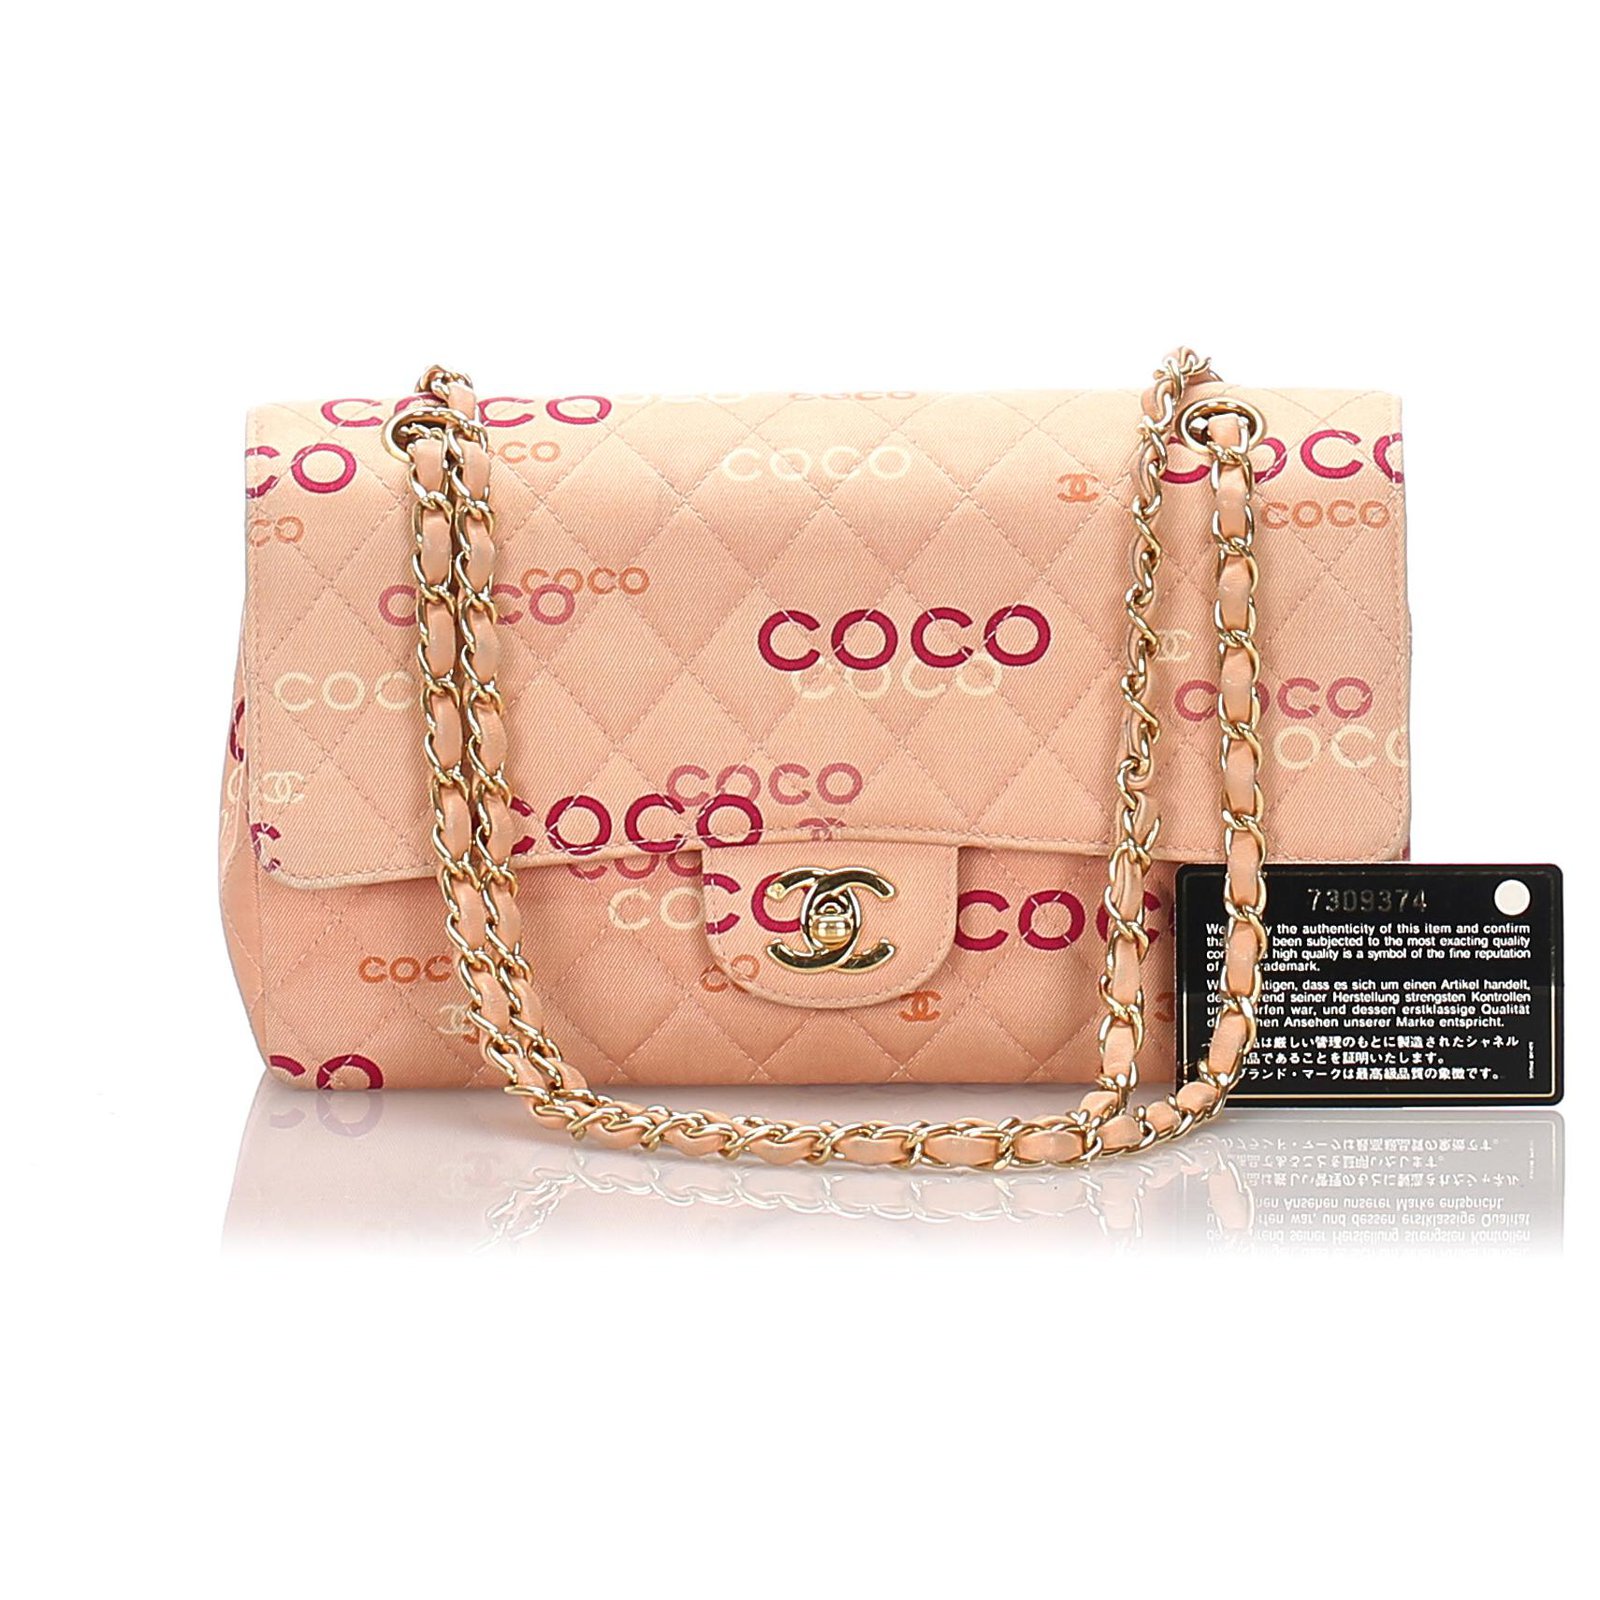 Chanel Pink Medium Coco Classic lined Flap Bag White Leather